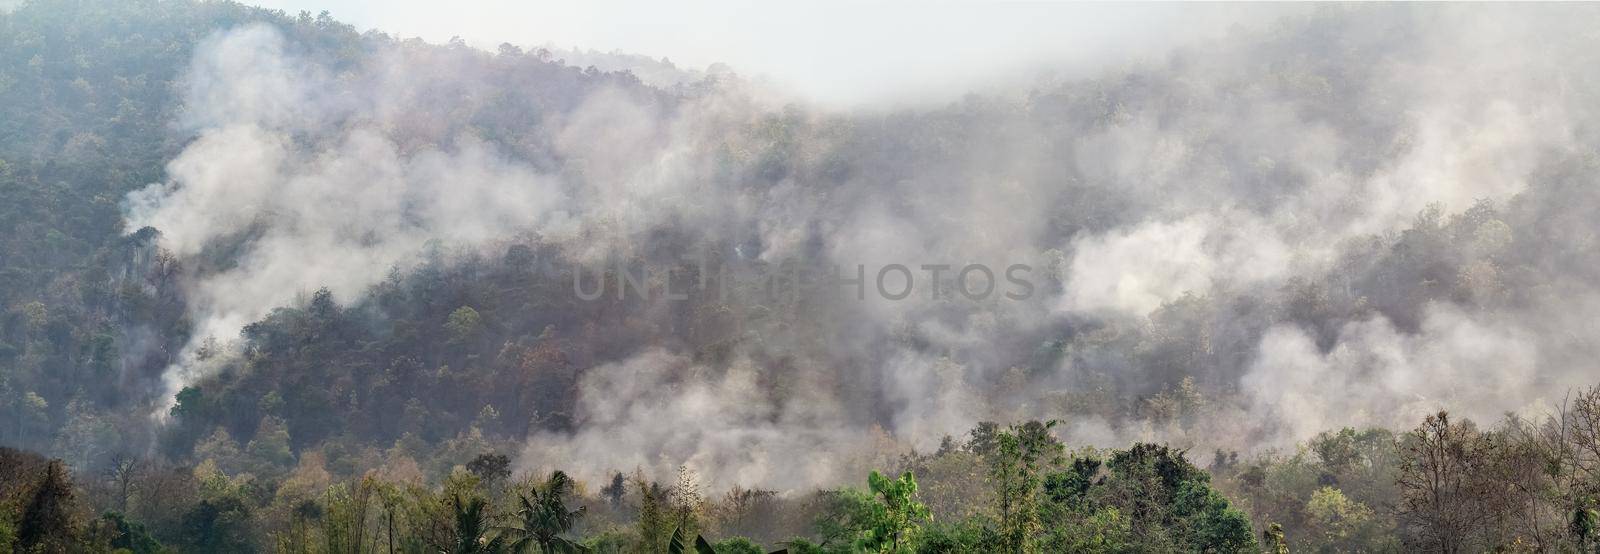 Amazon rain forest fire disaster is burning at a rate scientists have never seen before. by toa55